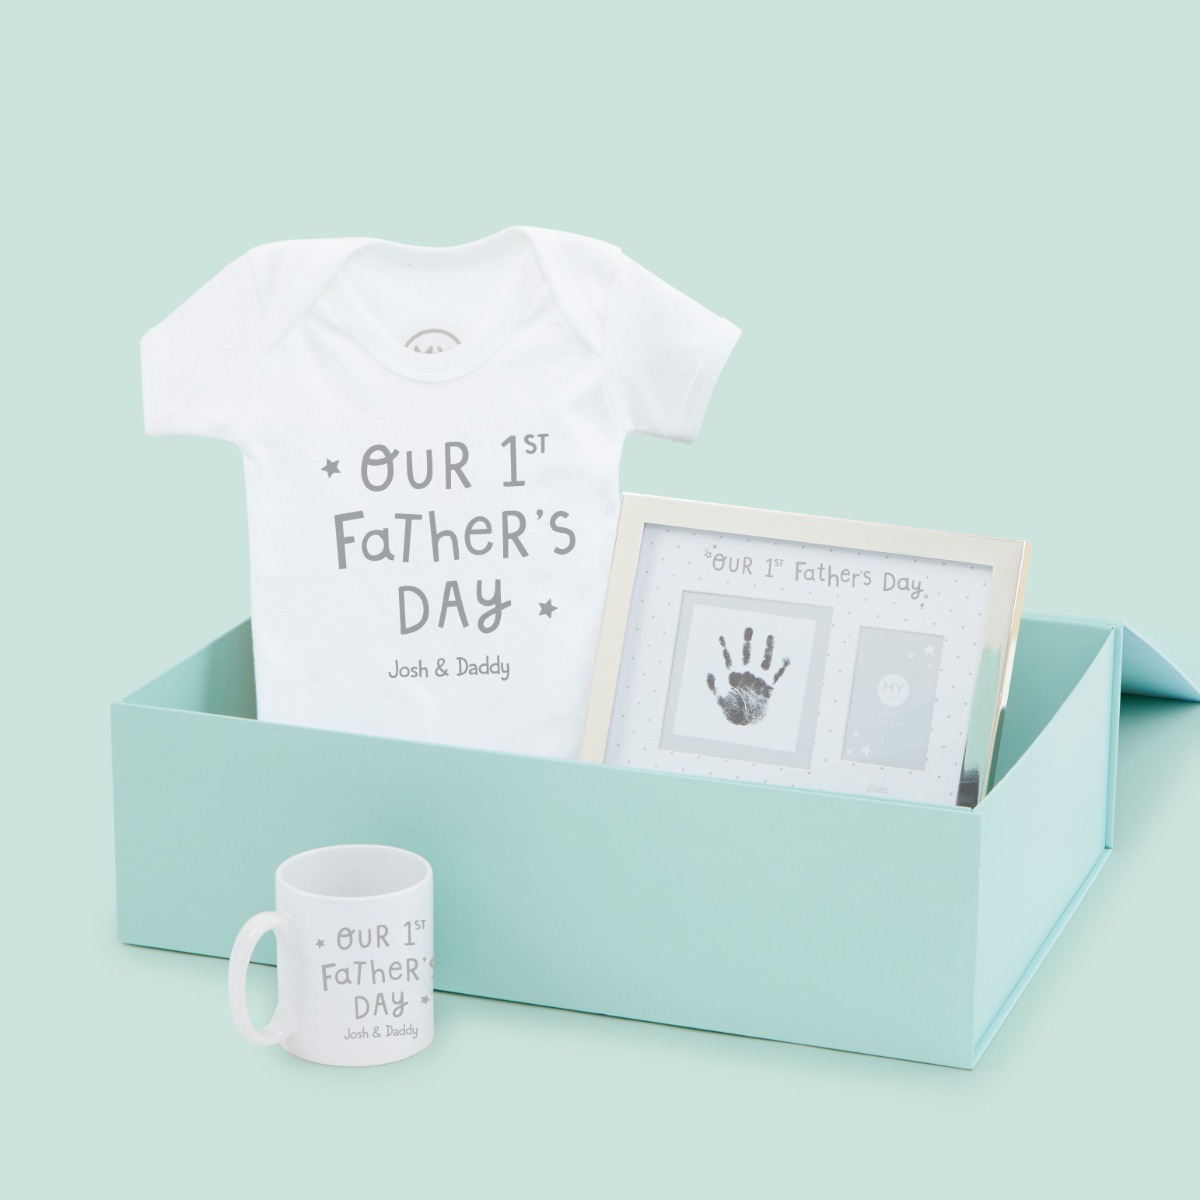 Our 1st Father’s Day Keepsake Gift Set